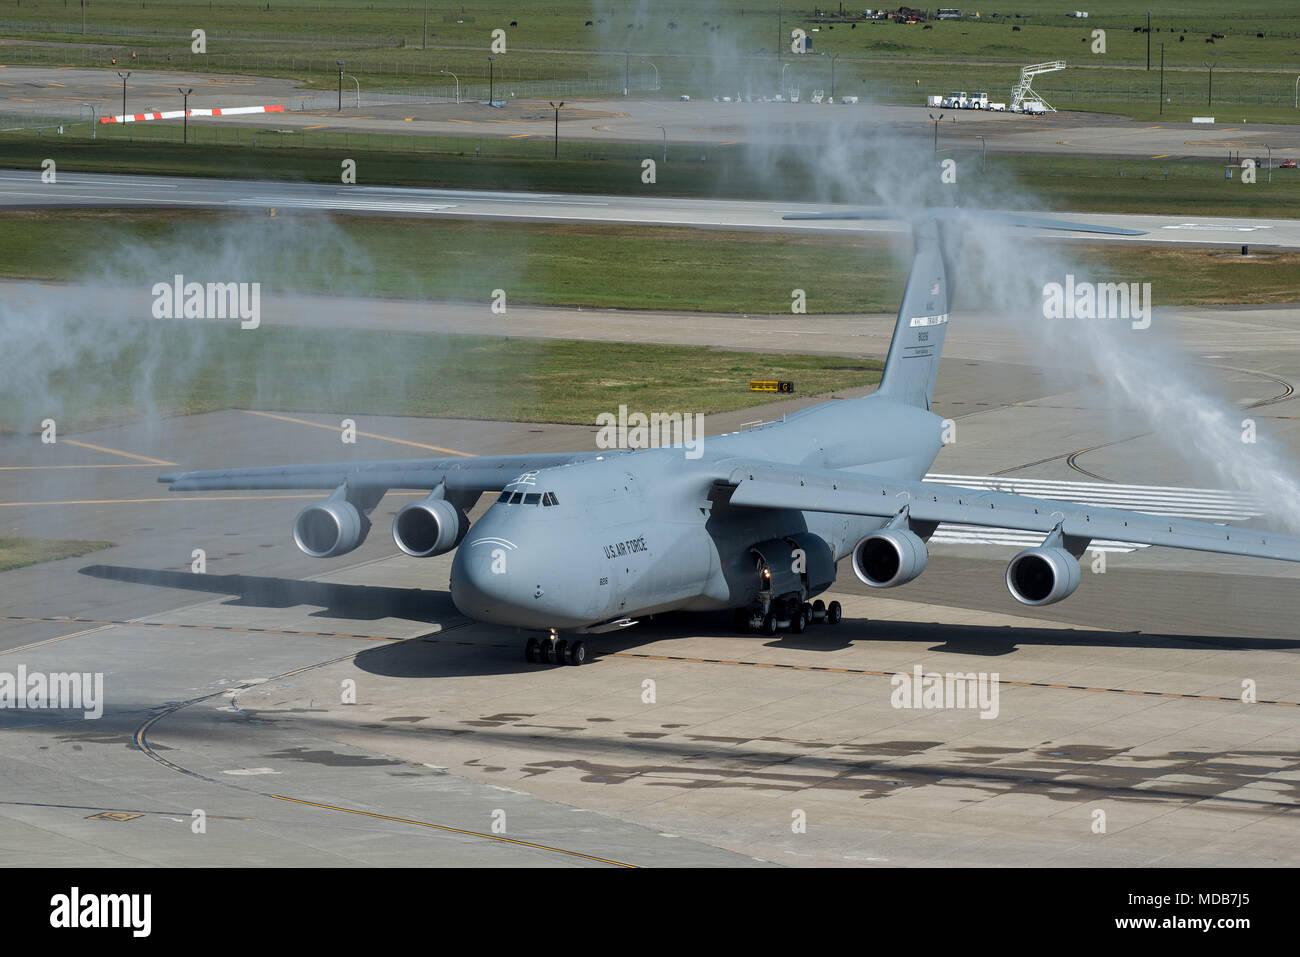 The last C-5M Super Galaxy to join the fleet at Travis Air Force Base, Calif., arrives April 17, 2018. The C-5M, with a cargo load of 281,001 pounds, can fly 2,150 nautical miles, offload, and fly to a second base 500 nautical miles away from the original destination, all without aerial refueling. (U.S. Air Force photo by Louis Briscese) Stock Photo